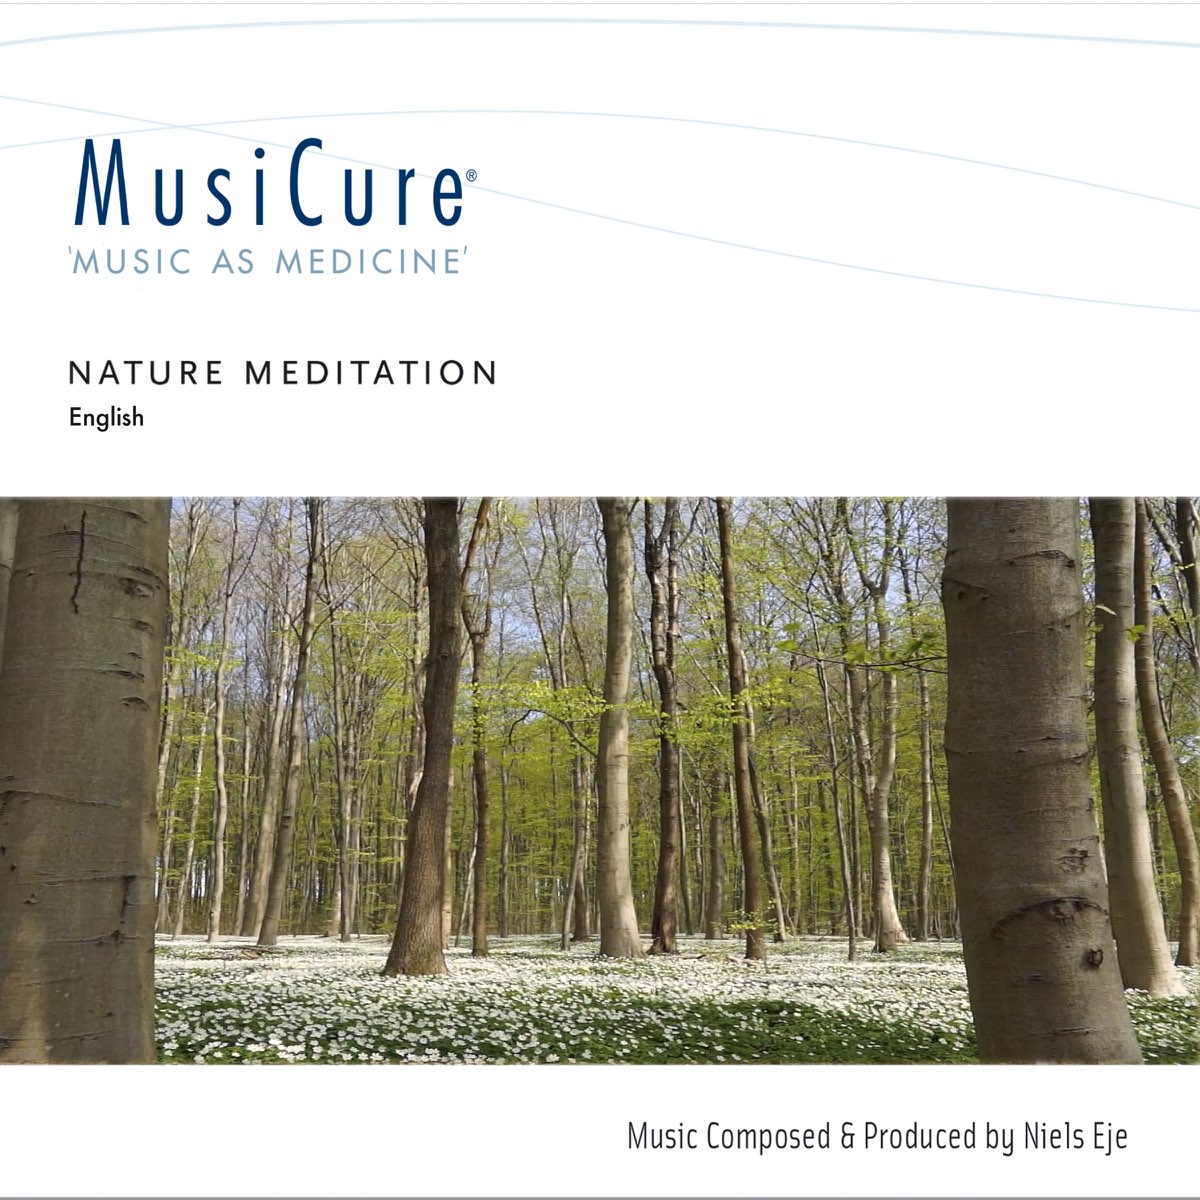 MusiCure Nature Meditation-English - Album by Niels Eje - Apple Music